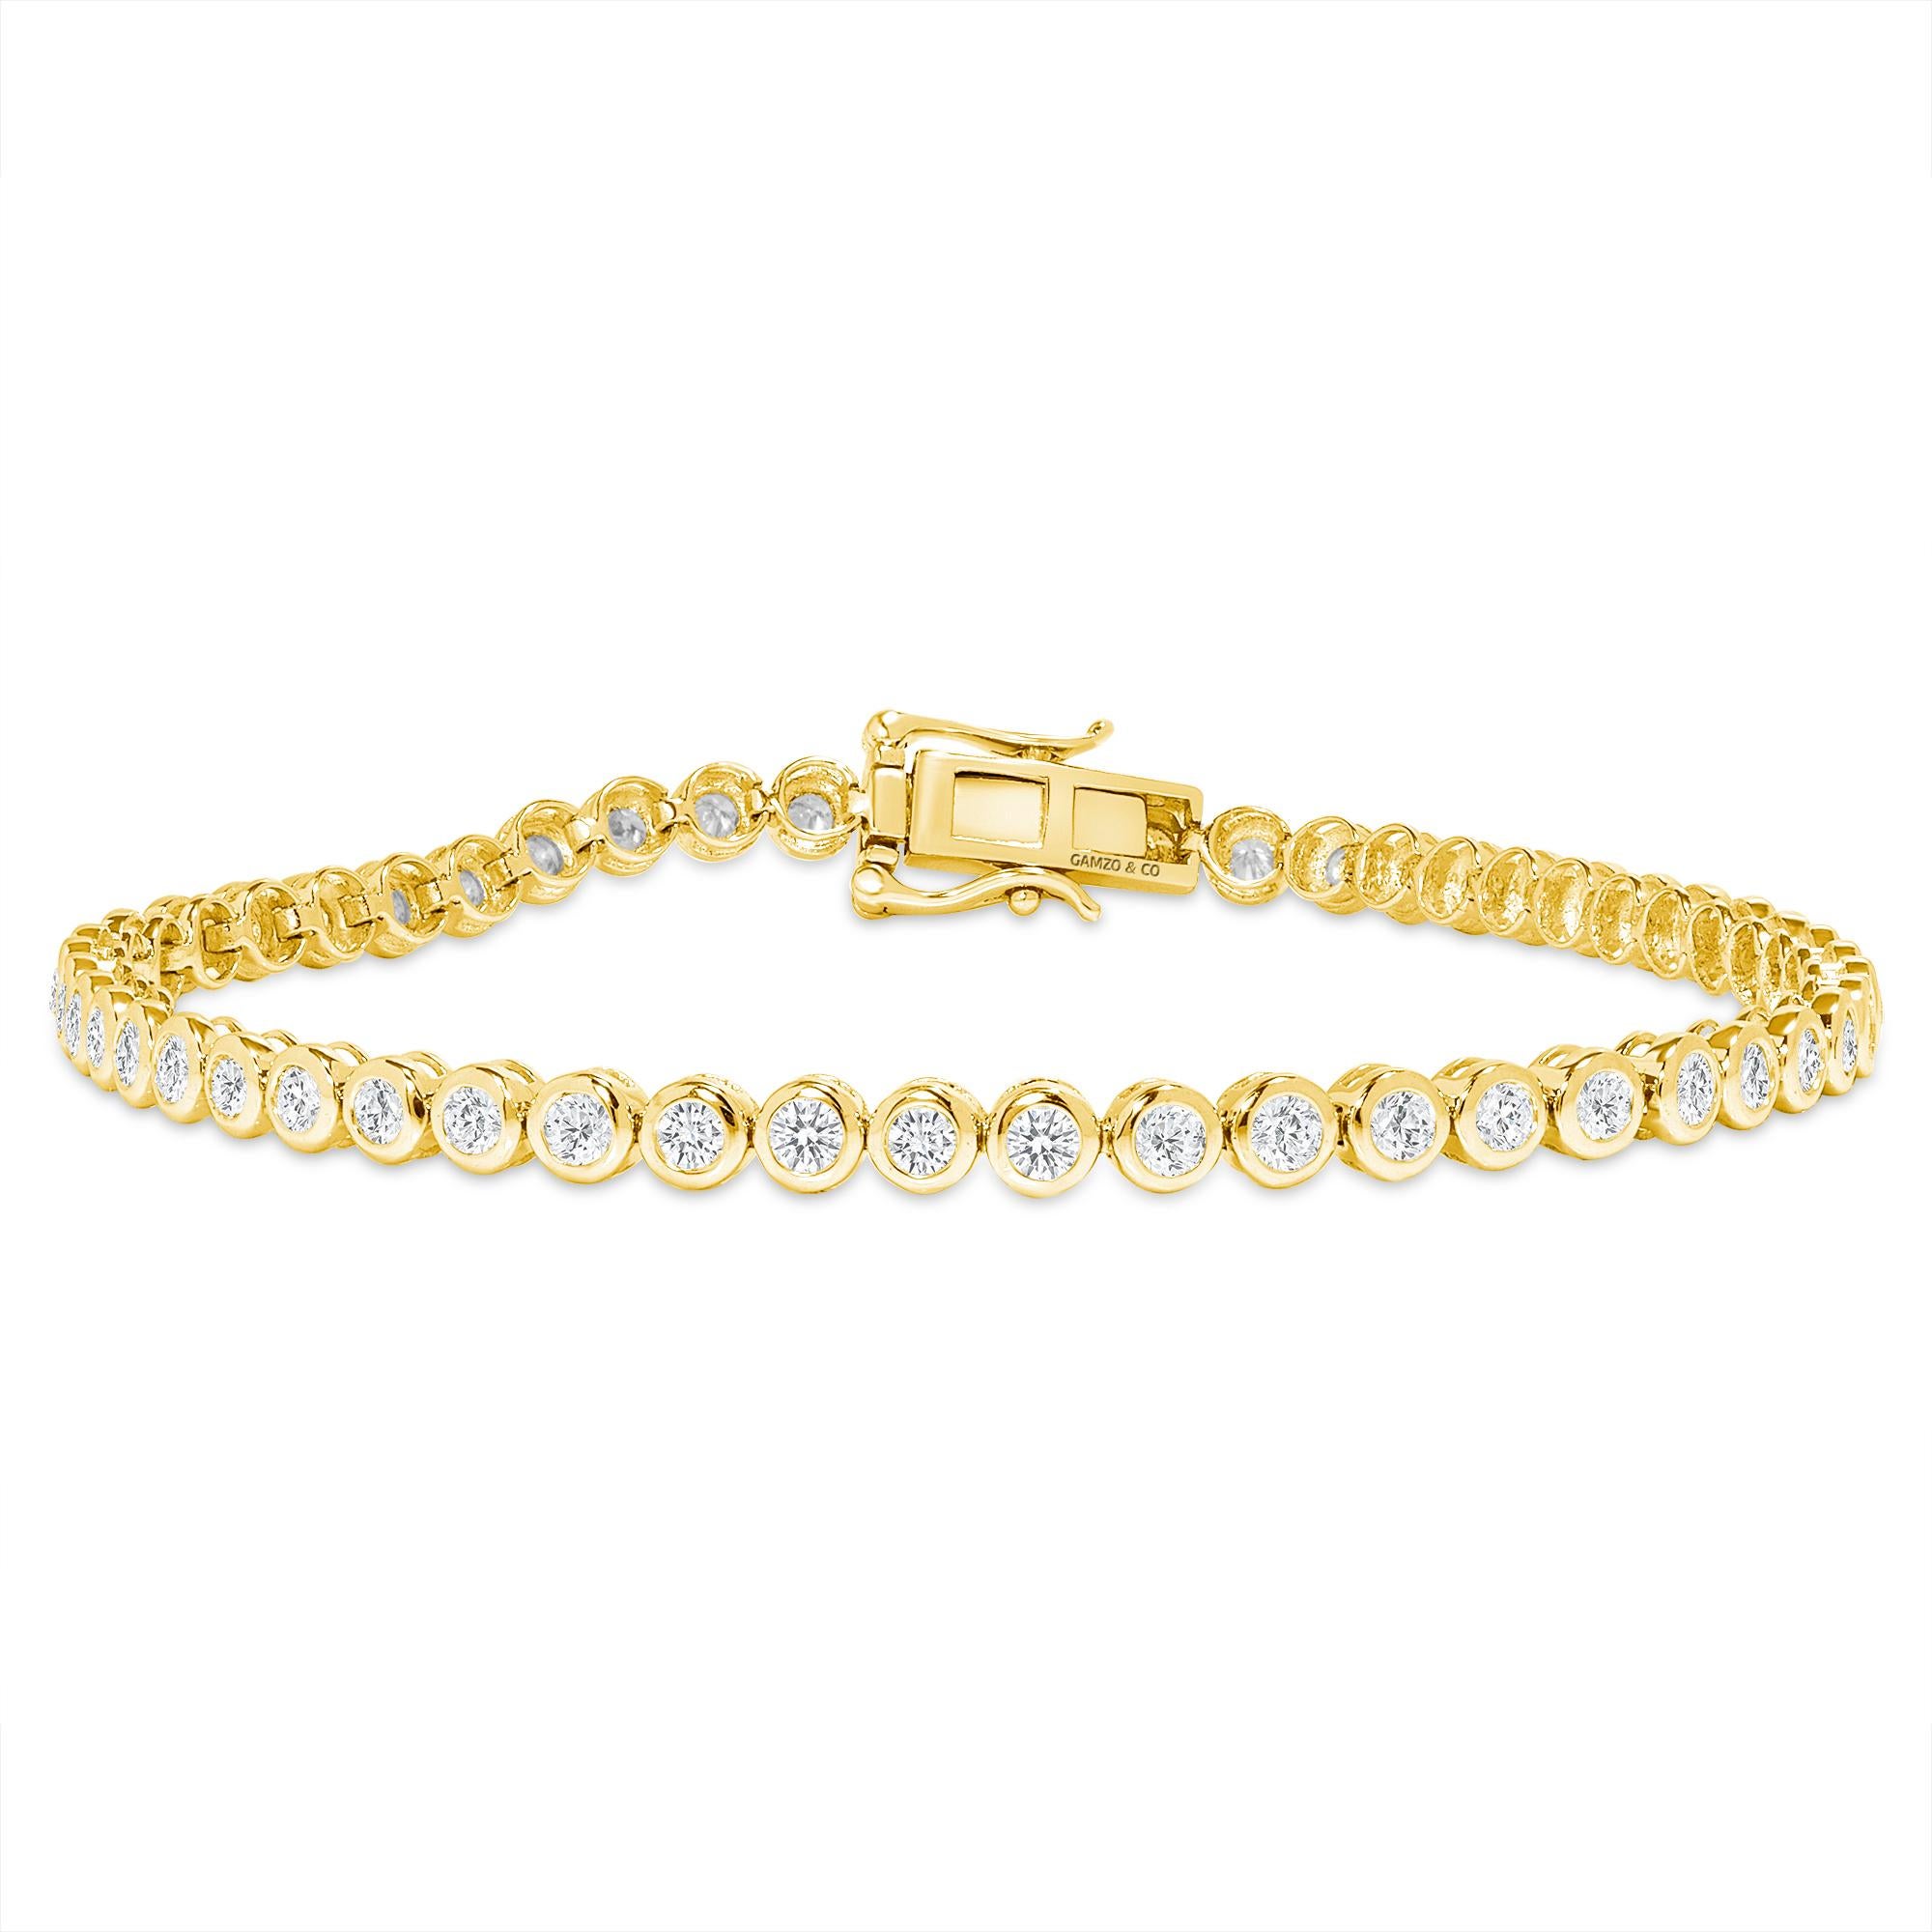 These beautiful round diamonds dance around your wrist as they absorb light and attention.
Metal: 14k Gold
Diamond Cut: Round
Diamond Total Carats: 5ct
Diamond Clarity: VS
Diamond Color: F
Color: Yellow Gold
Bracelet Length: 7.5 Inches 
Included